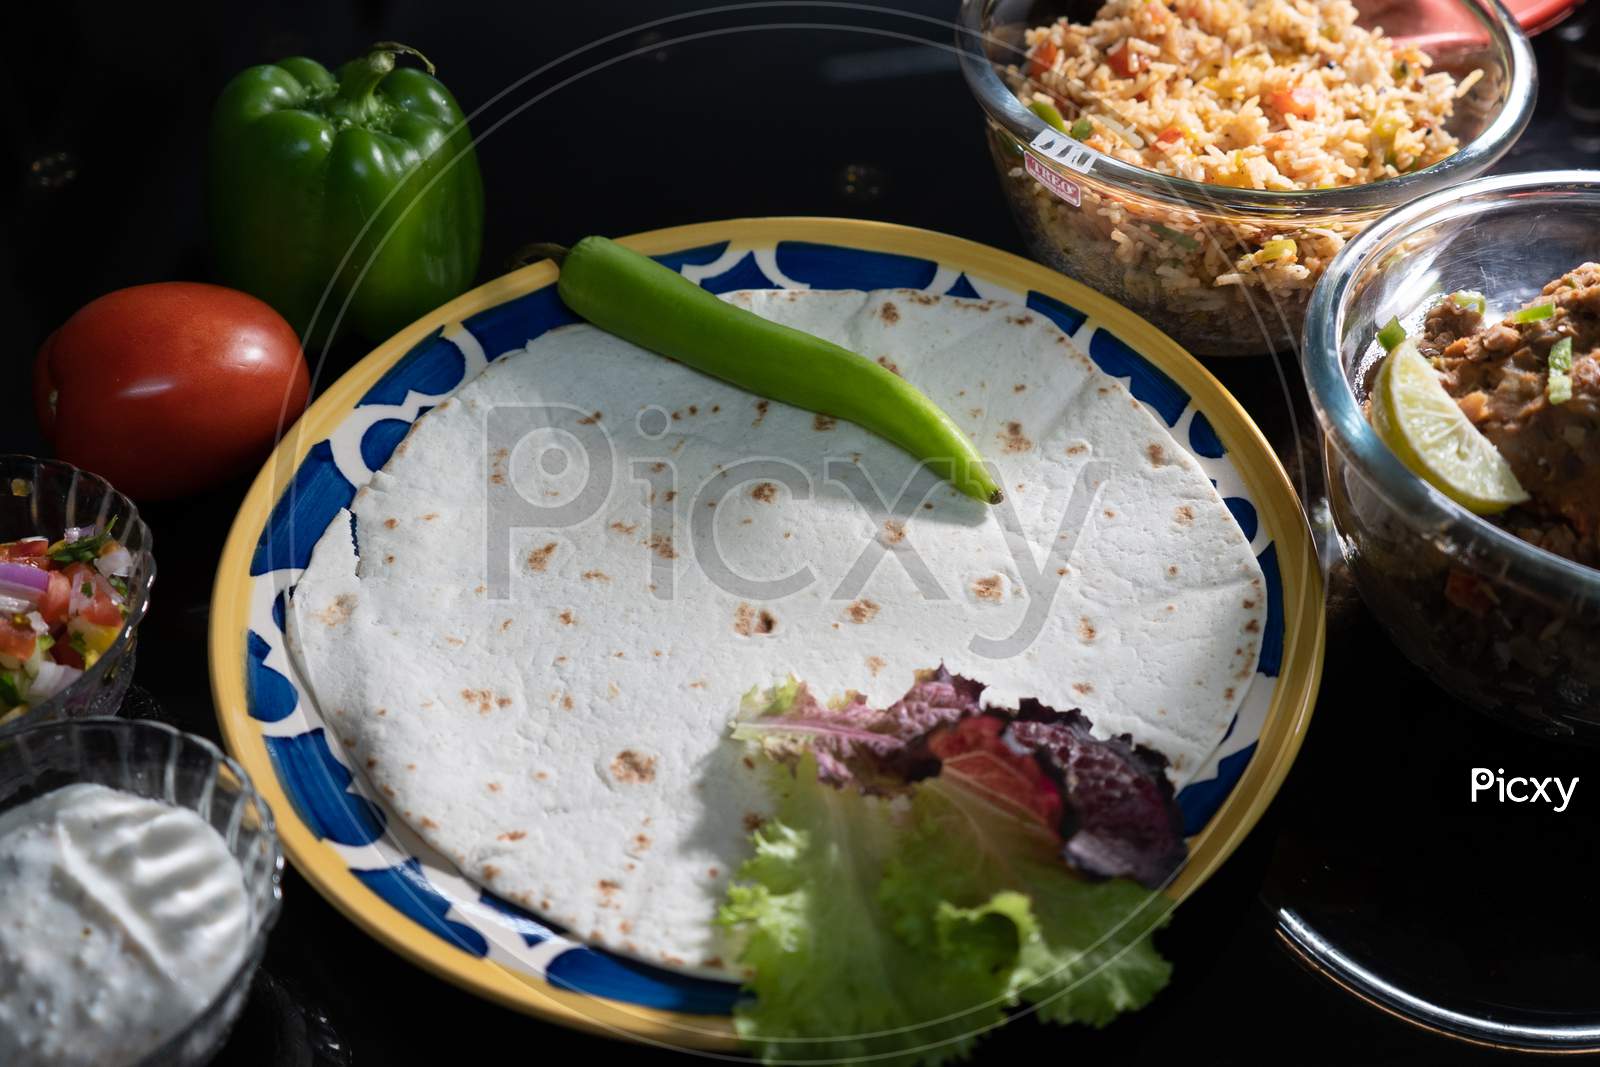 Low Key Moody Shot Showing Roti Paratha Tortilla Flatbread On Glass Plate Surrounded By Fresh Vegetables Like Capsicum, Tomatos, Rice And Meat All The Ingridients To Prepare Mexican Food